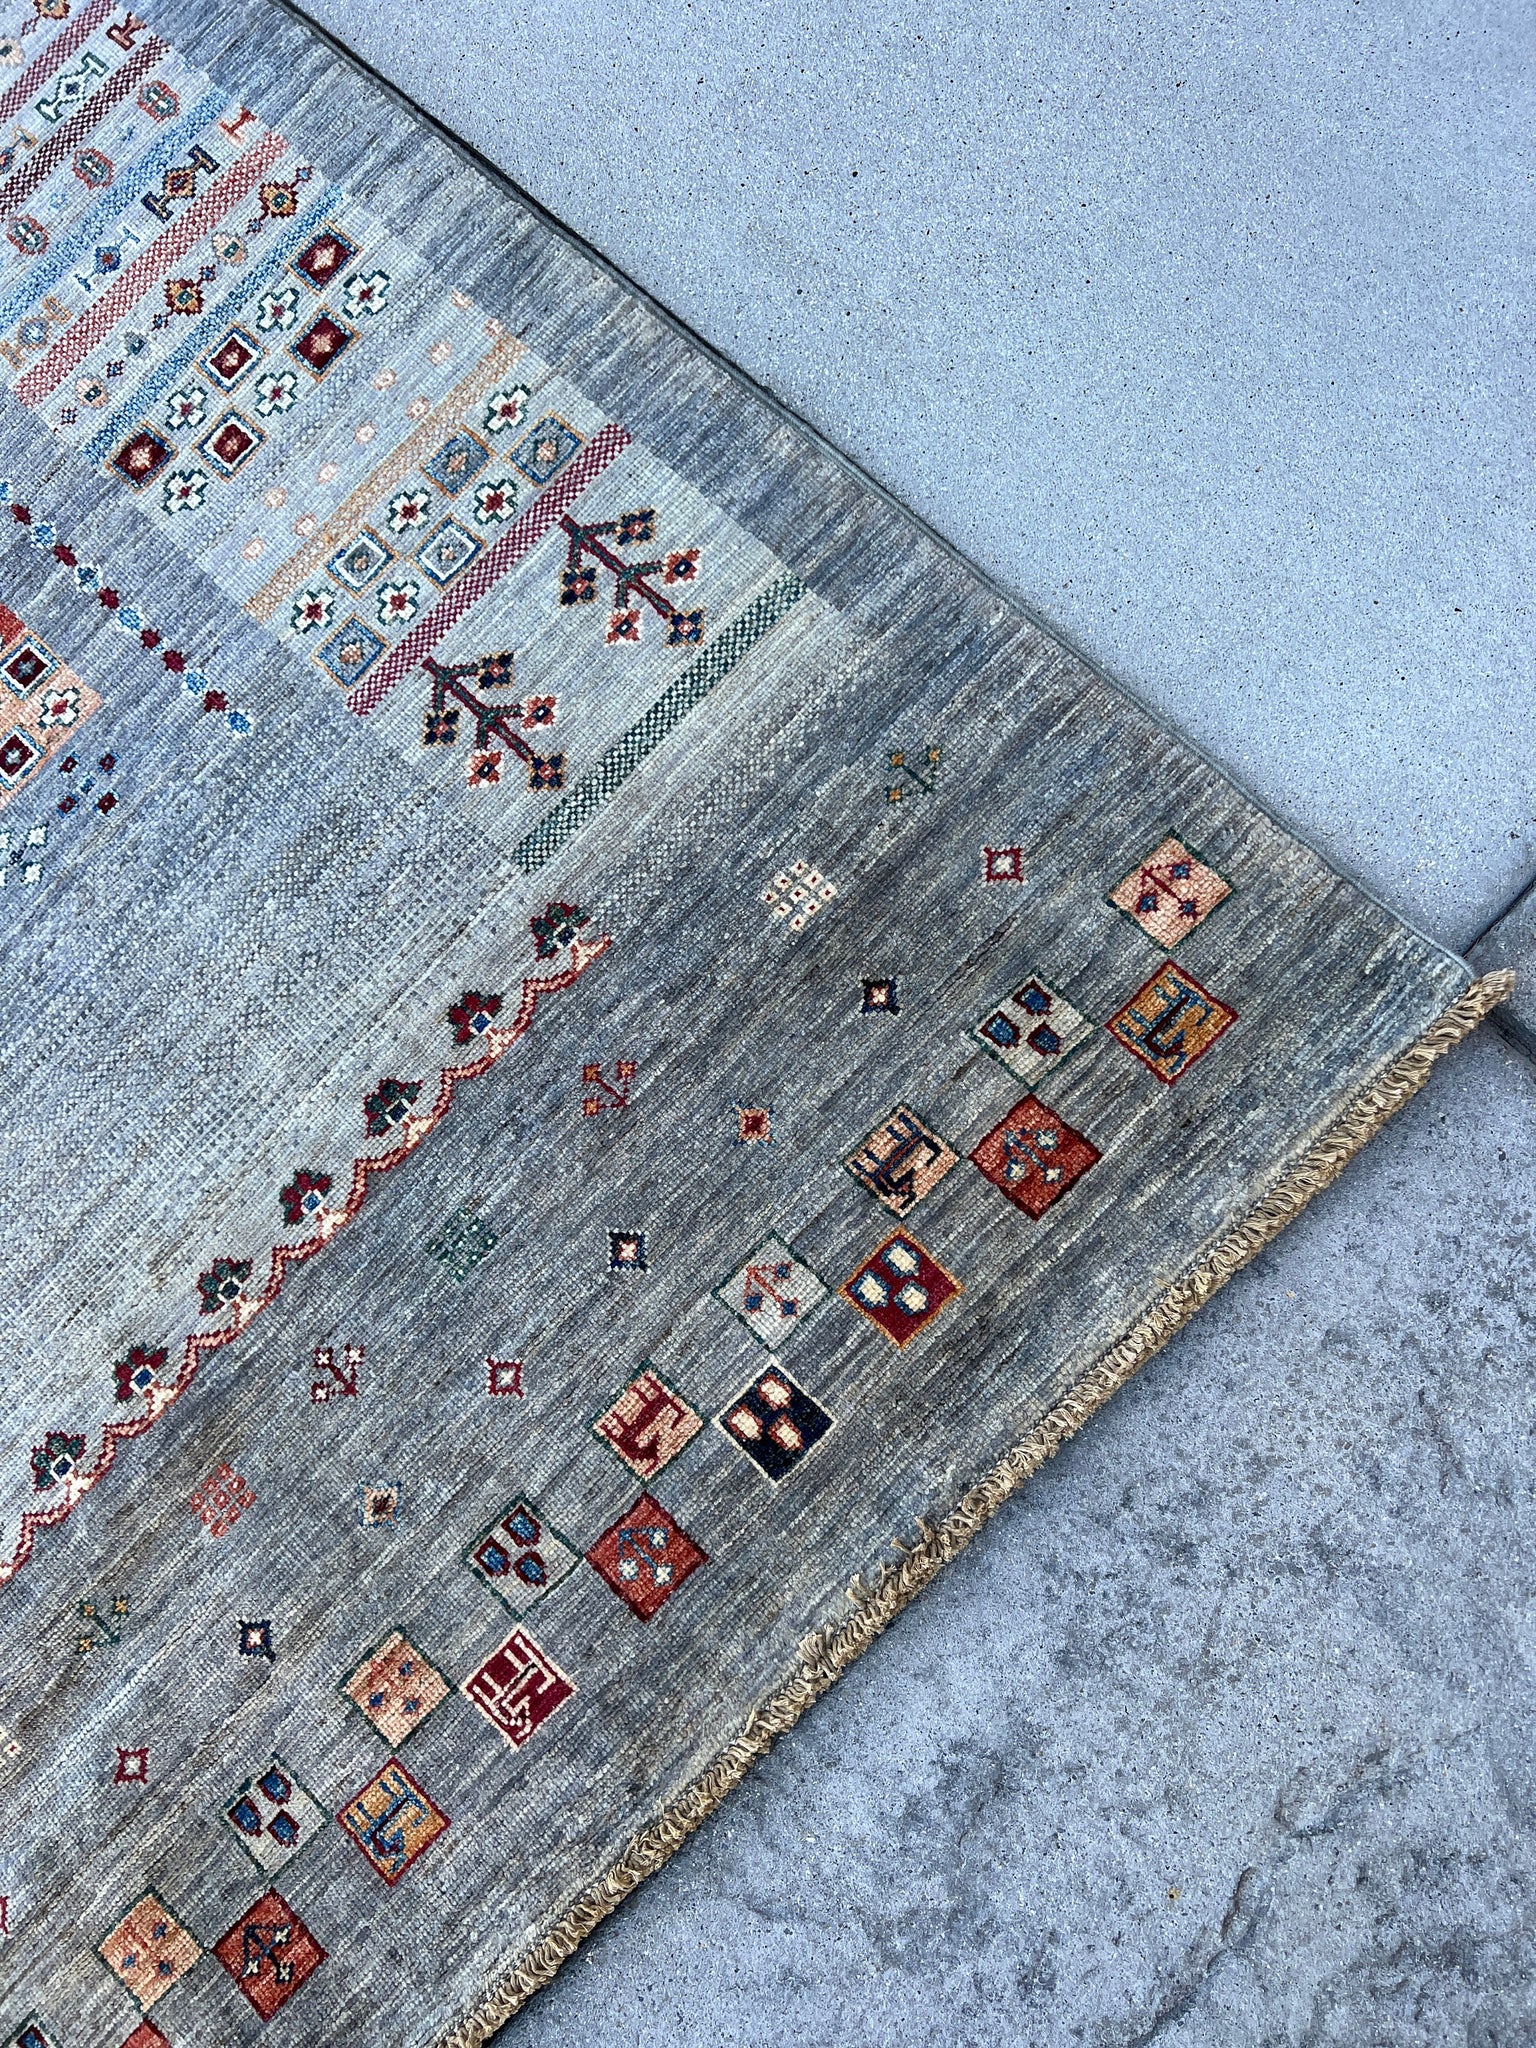 6x8 (180x245) Hand Knotted Afghan Rug | Grey Charcoal Burnt Orange Maroon Yellow Denim Blue Coral Green Navy Cream Beige | Floral Wool